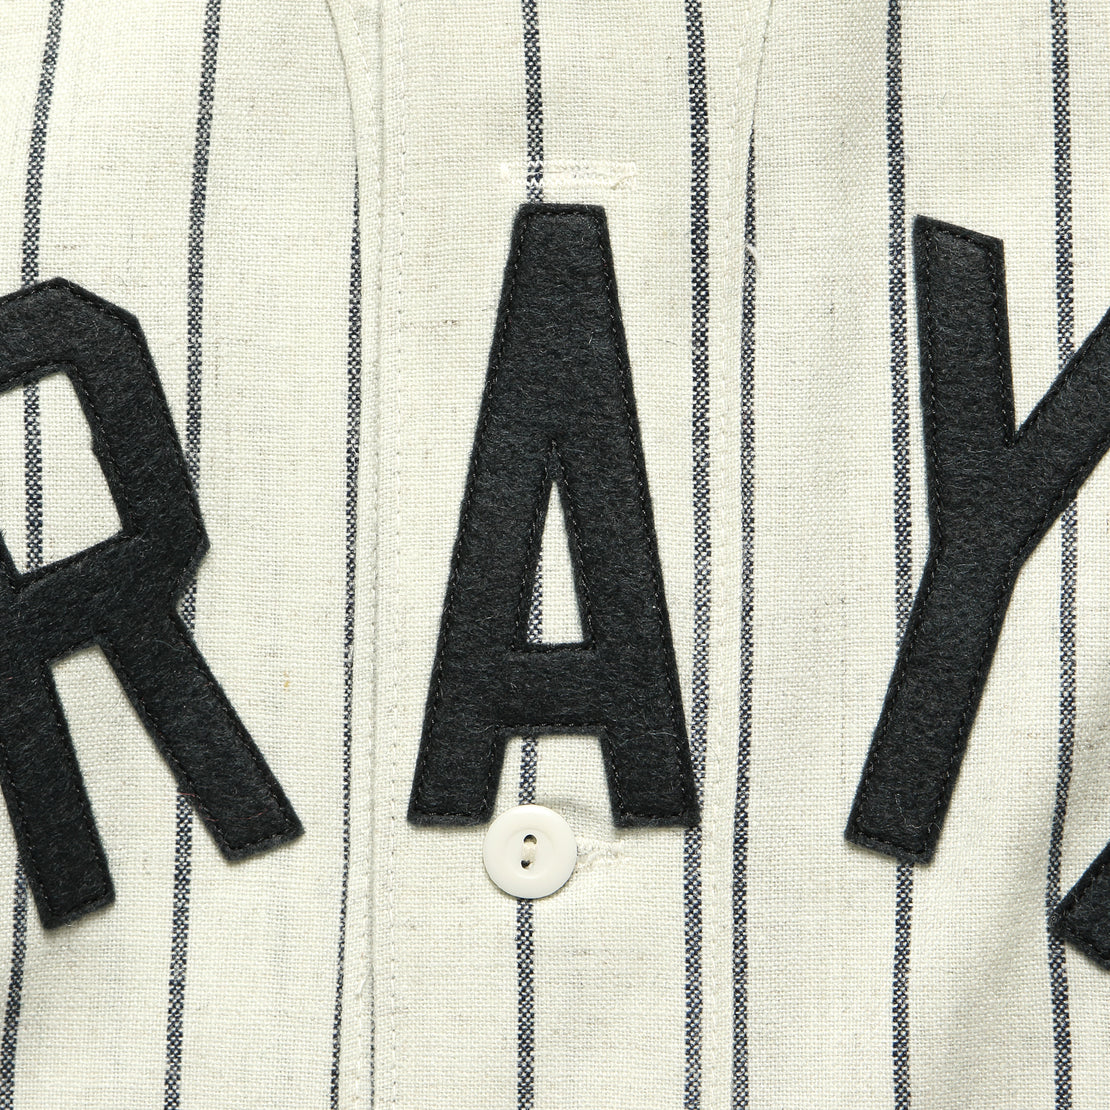 Washington Homestead Grays 1944 Home Jersey - White Pinstripe - Ebbets Field Flannels - STAG Provisions - Tops - S/S Woven - Stripe